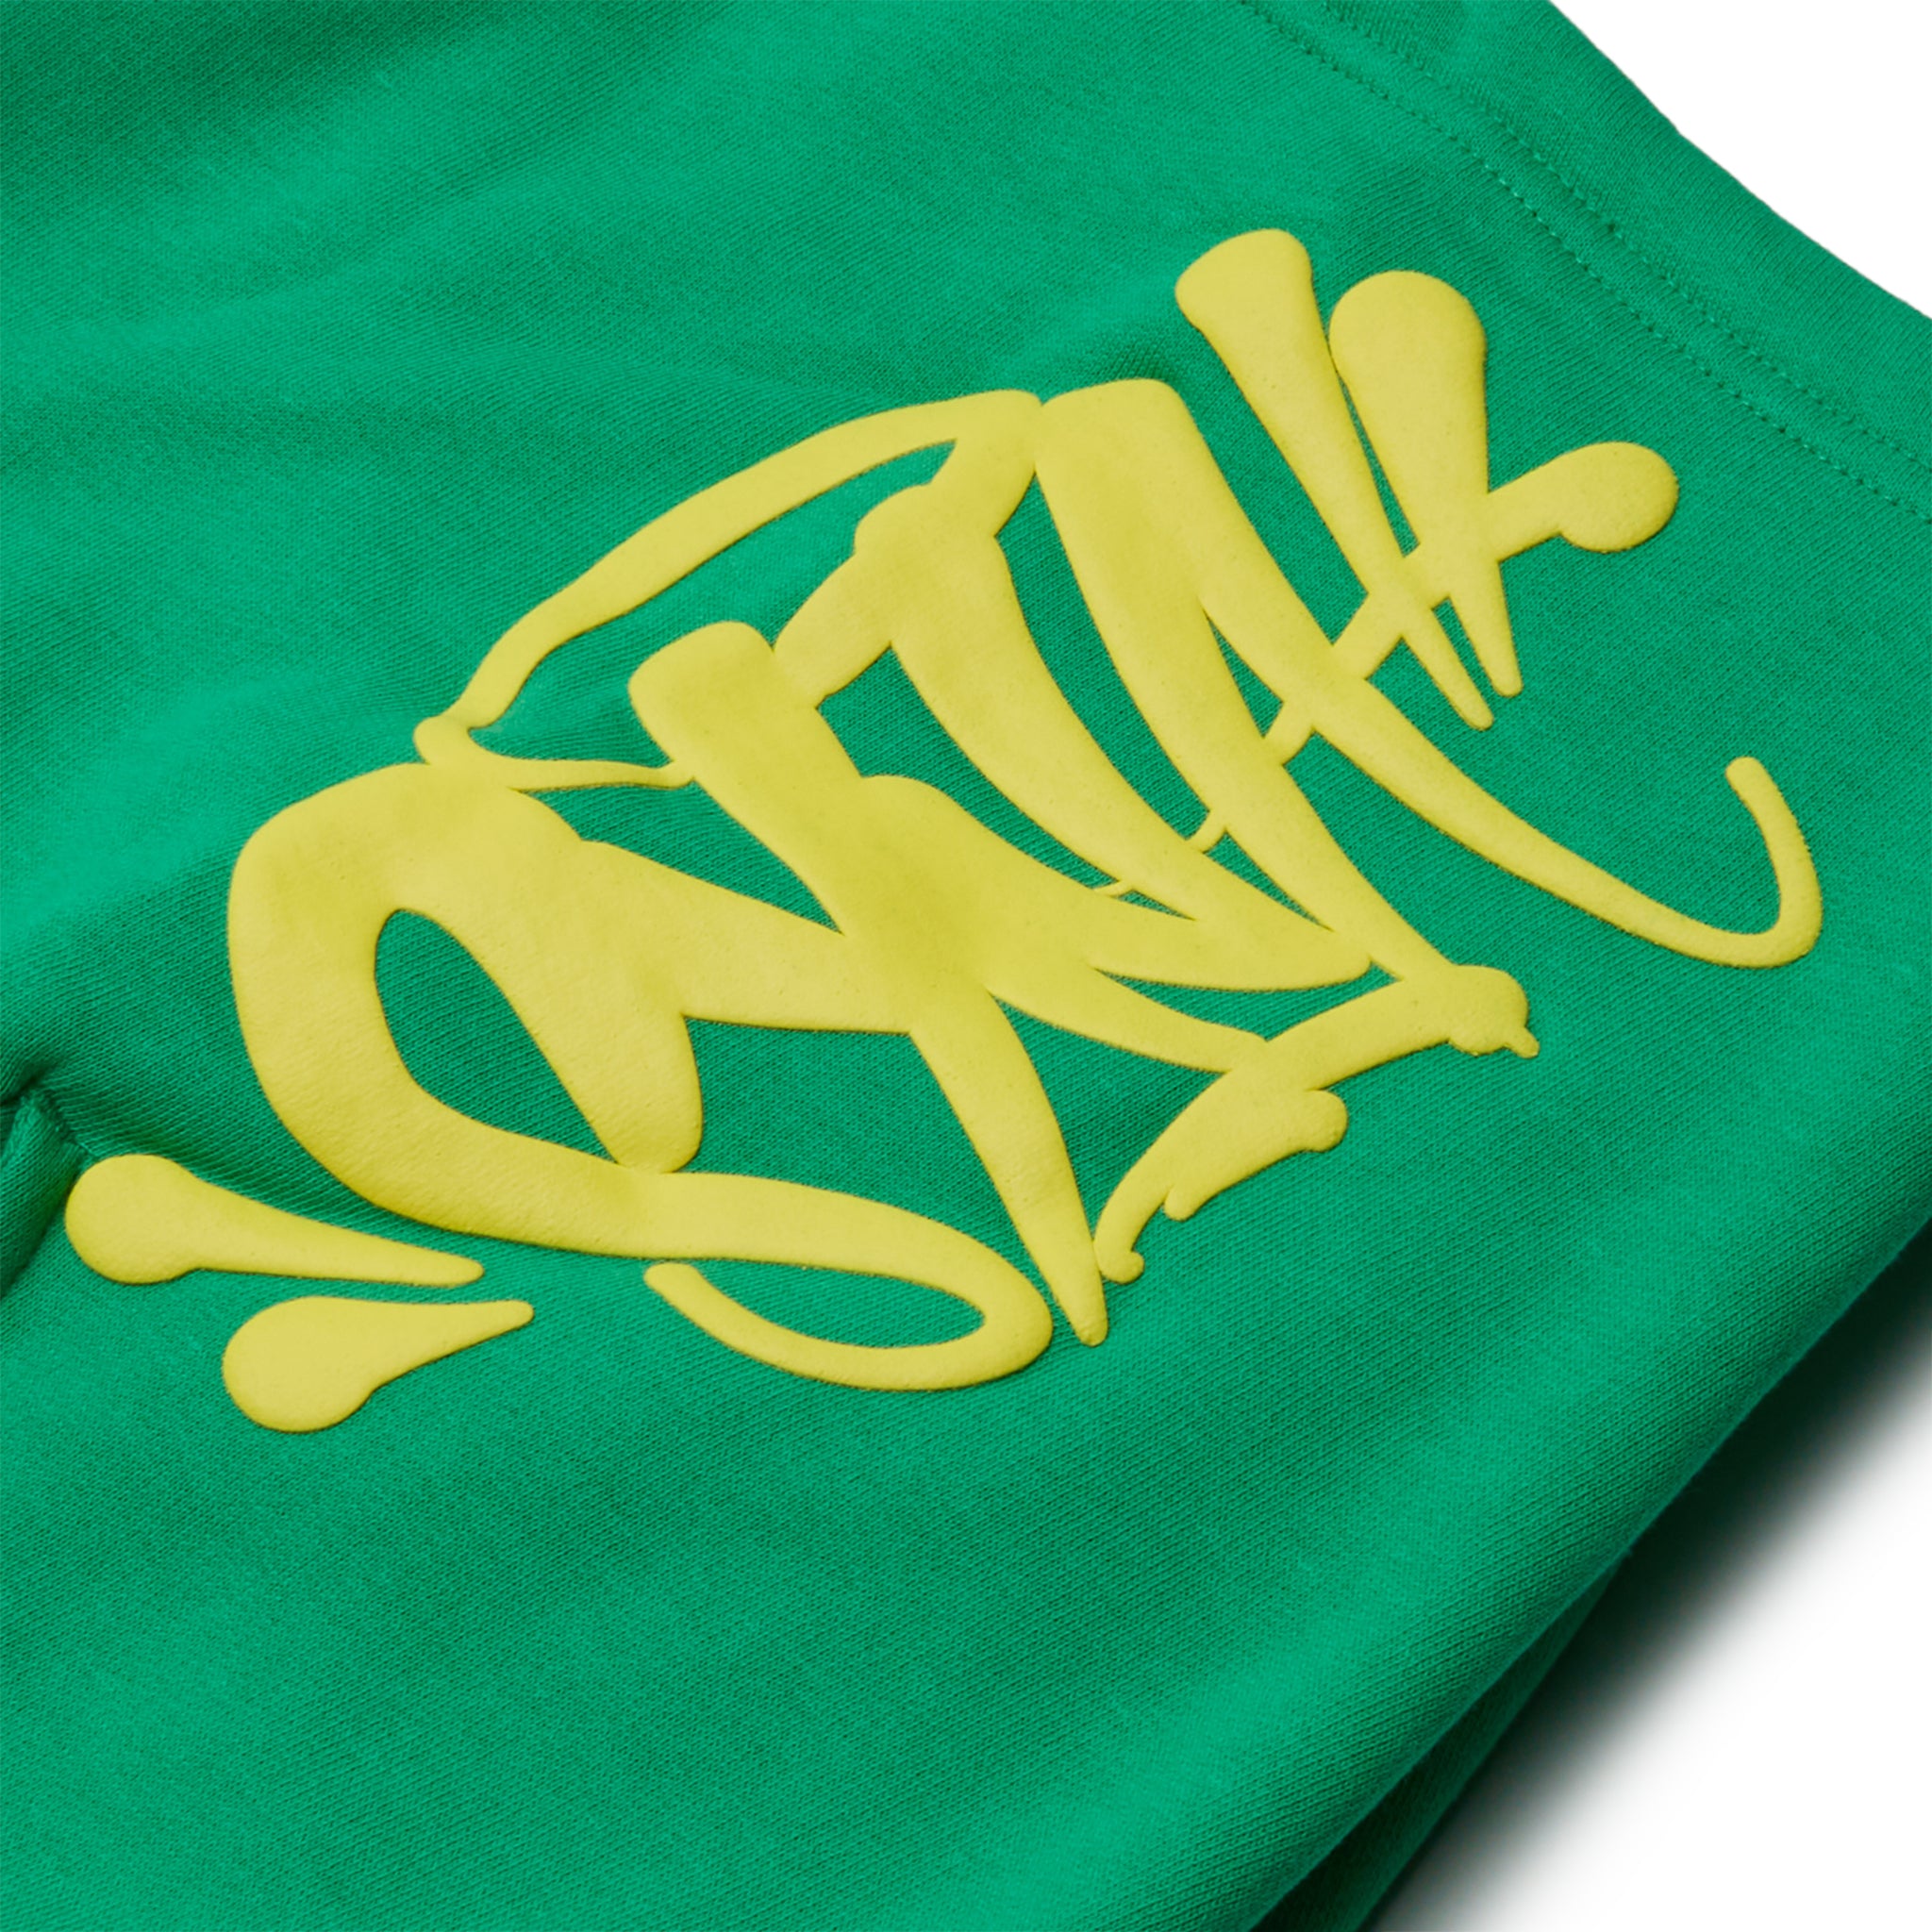 Shorts logo view of Syna World Team Syna Twinset Green T-Shirt & Shorts